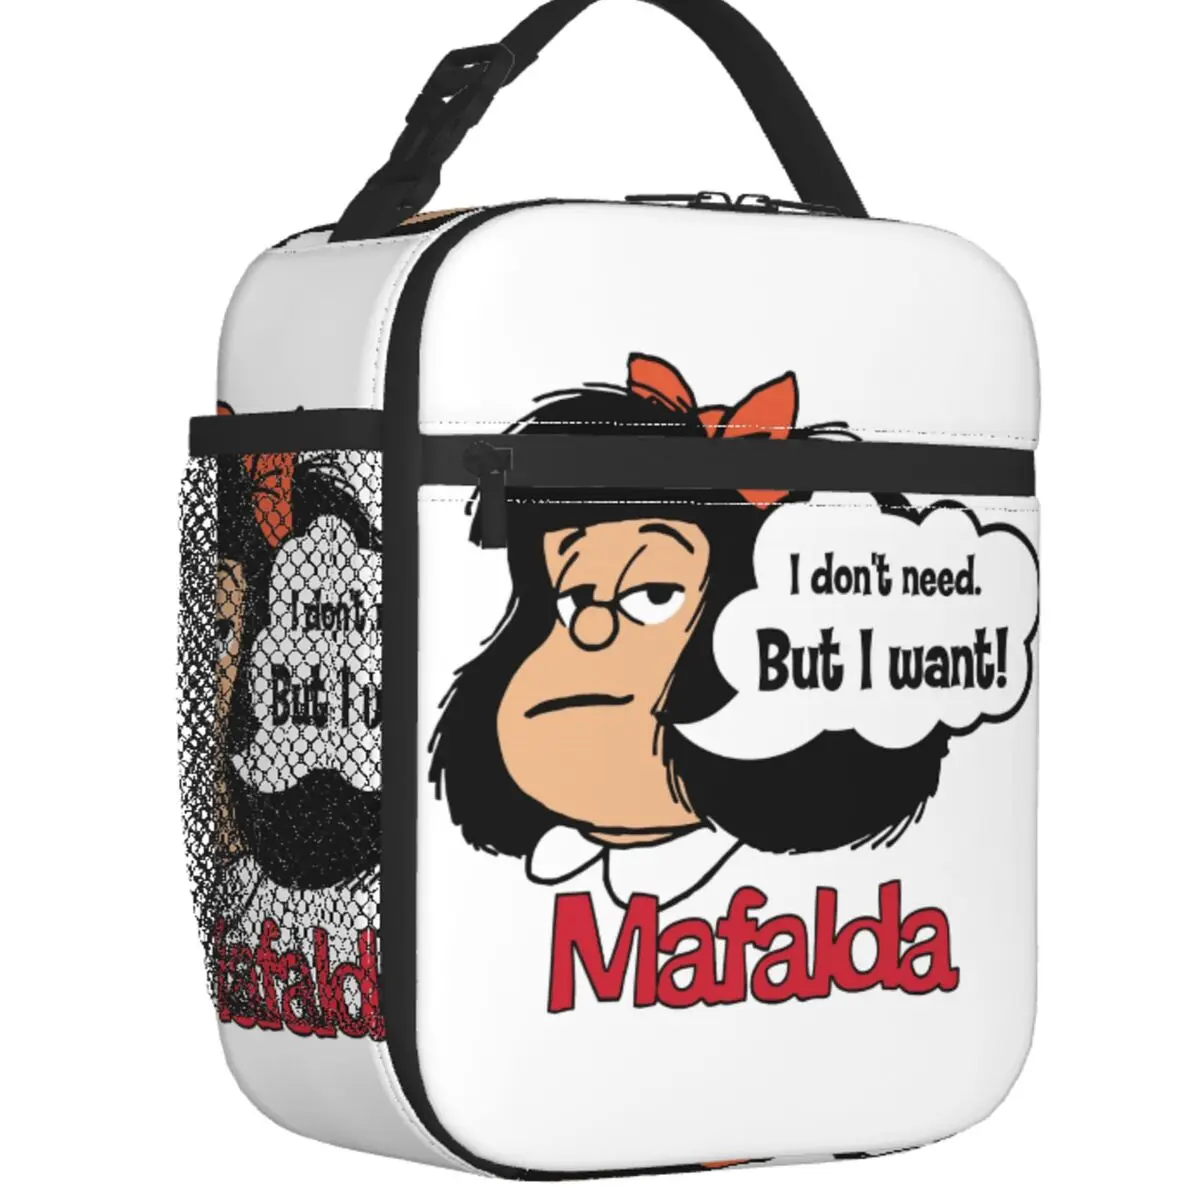 

Mafalda I Don't Need But I Want Insulated Lunch Bag Portable Quino Comic Cartoon Thermal Cooler Lunch Tote Office Picnic Travel